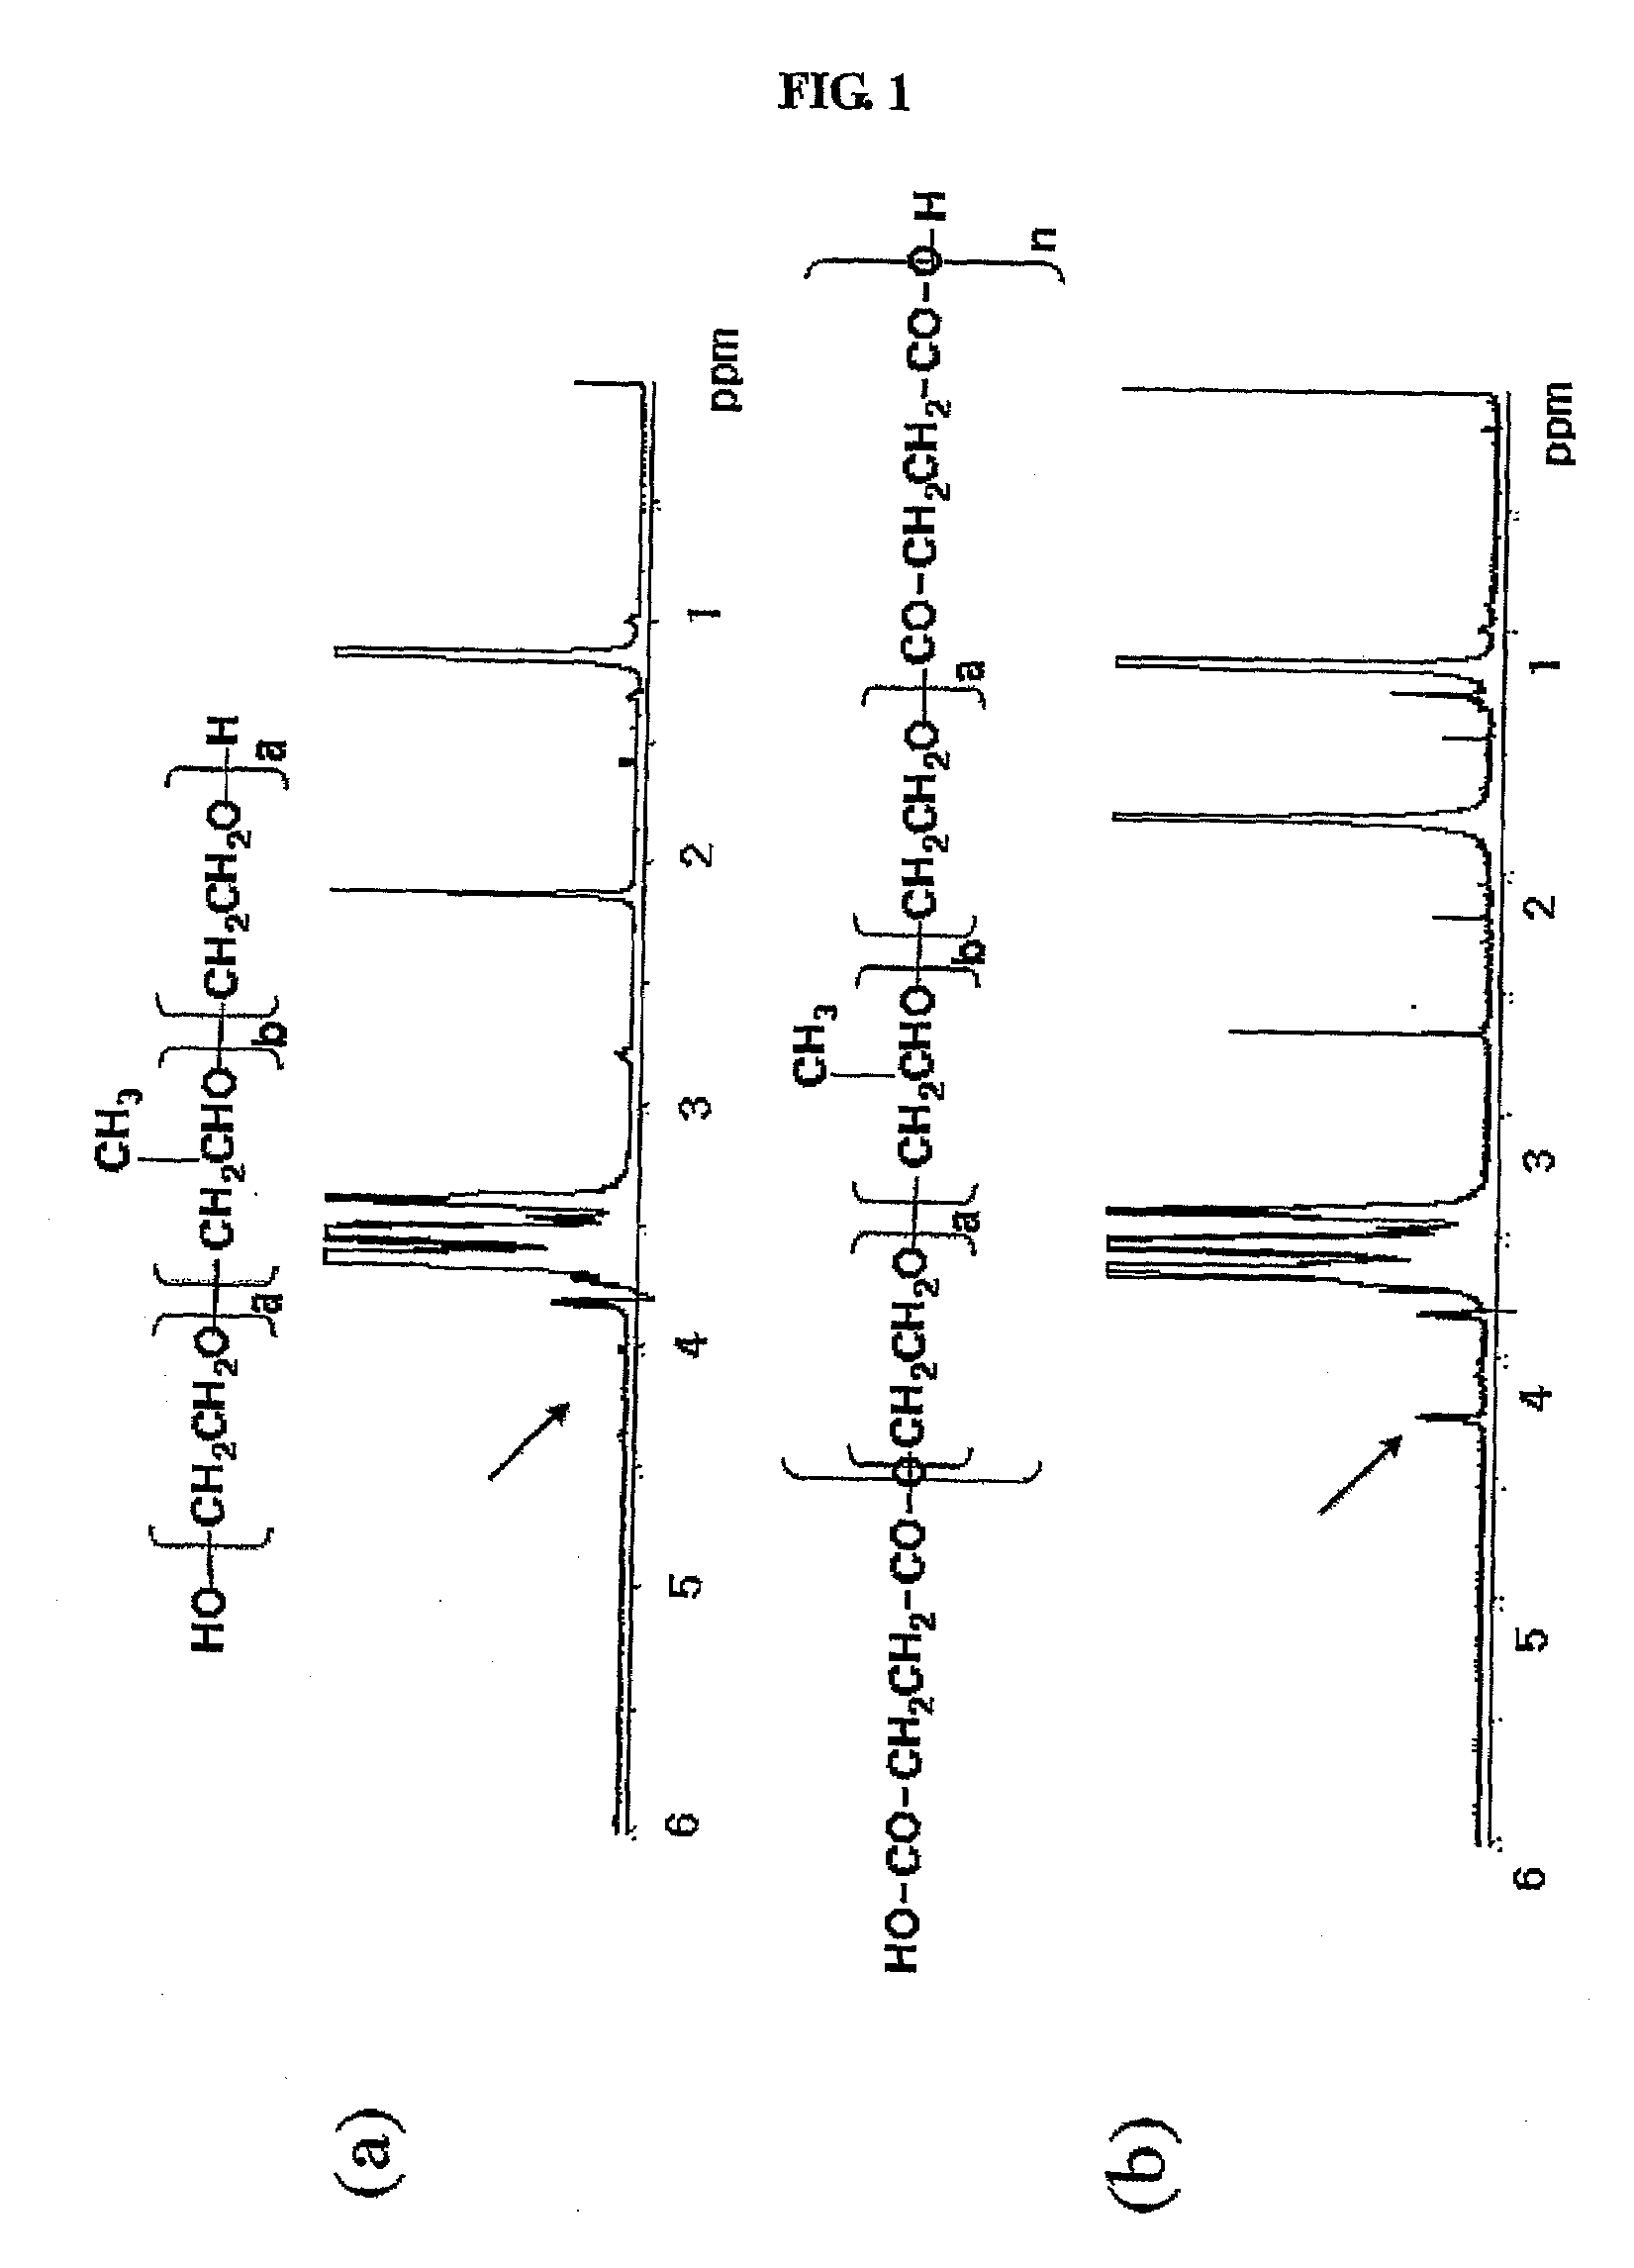 Composition for inhibiting adhesion